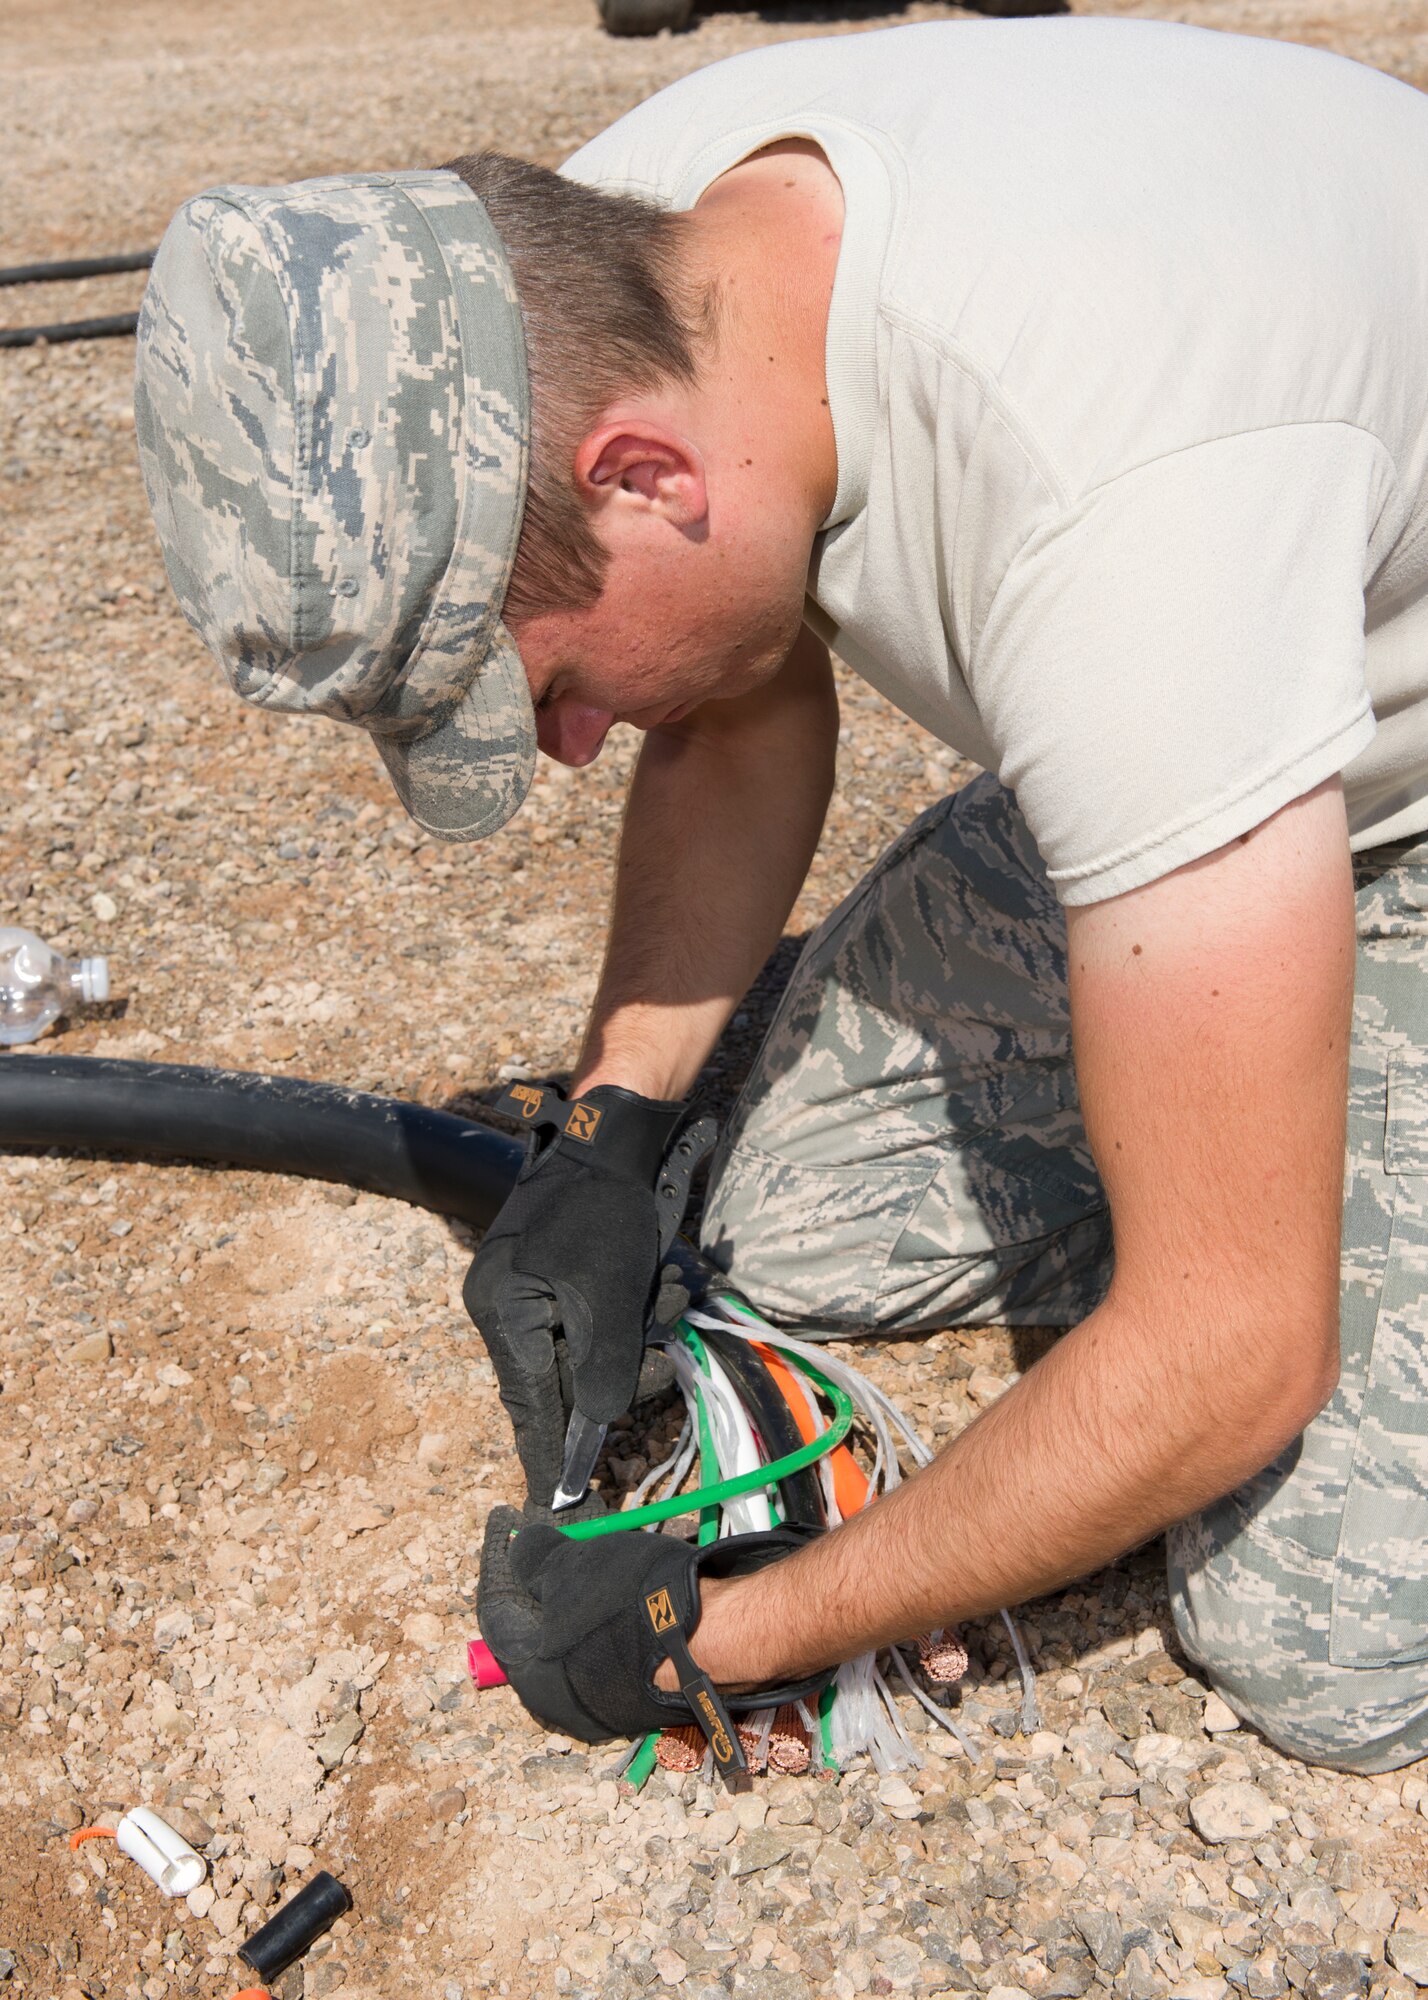 Airman 1st Class Keith Stoeber, 49th Materiel Maintenance Squadron power production apprentice, splices a wire in preparation to parallel two generators during a Basic Expeditionary Airfield Resources Base five-day training exercise at Holloman Air Force Base, N.M., July 10. Paralleling the generators will prevent system overload for the generators. (U.S. Air Force photo by Senior Airman Kasey Close/Released)